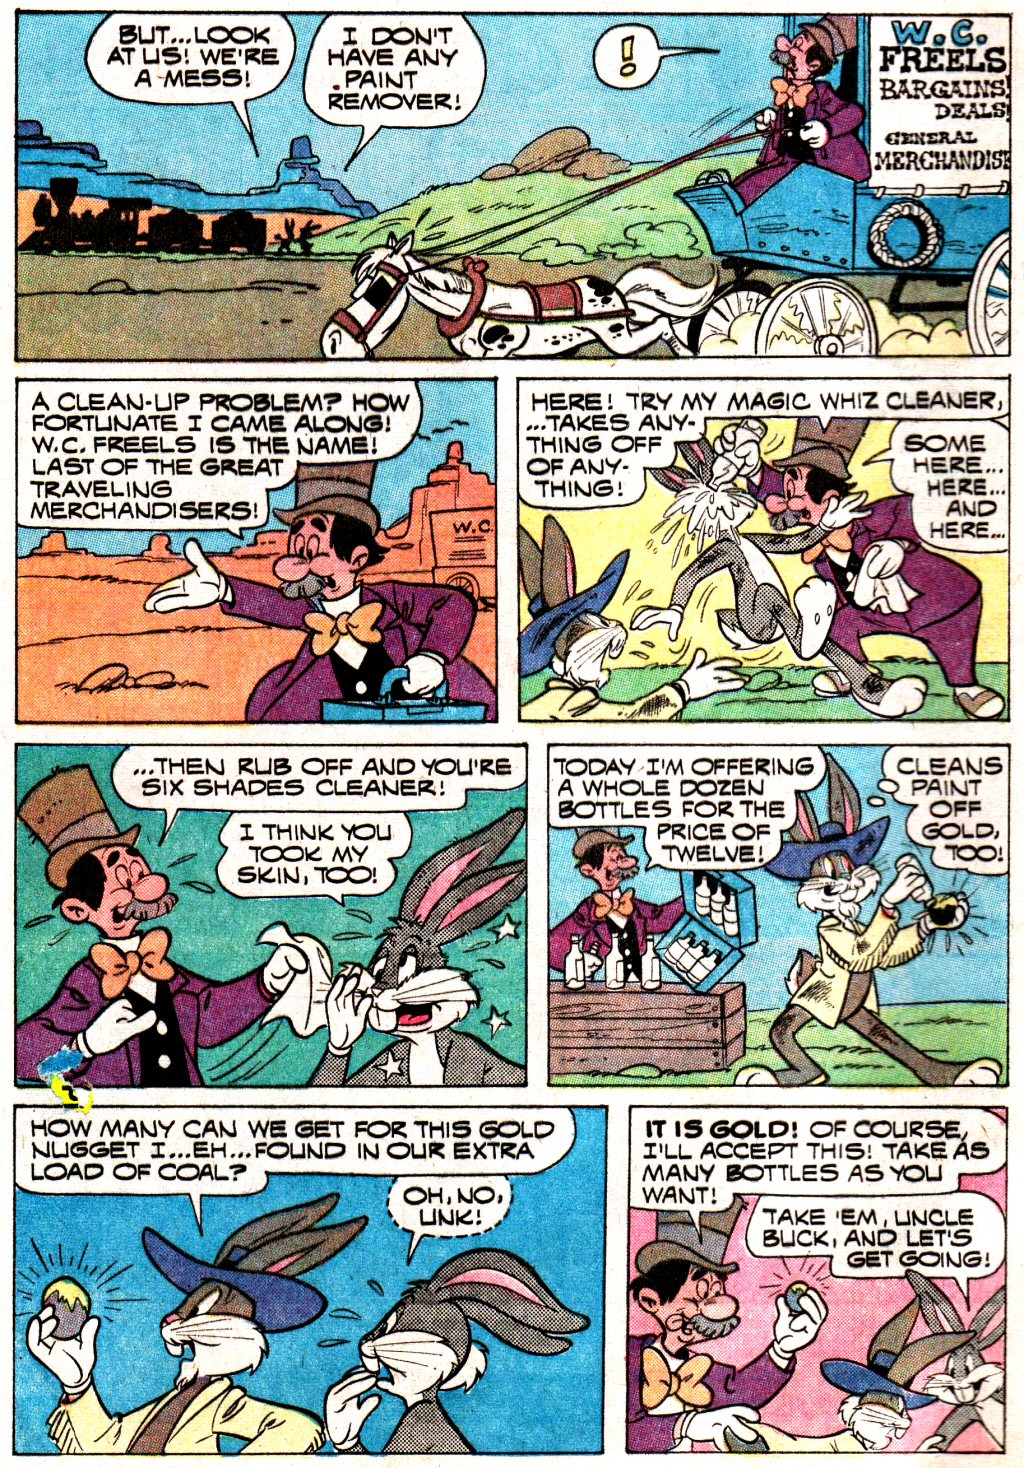 Read online Bugs Bunny comic -  Issue #148 - 4